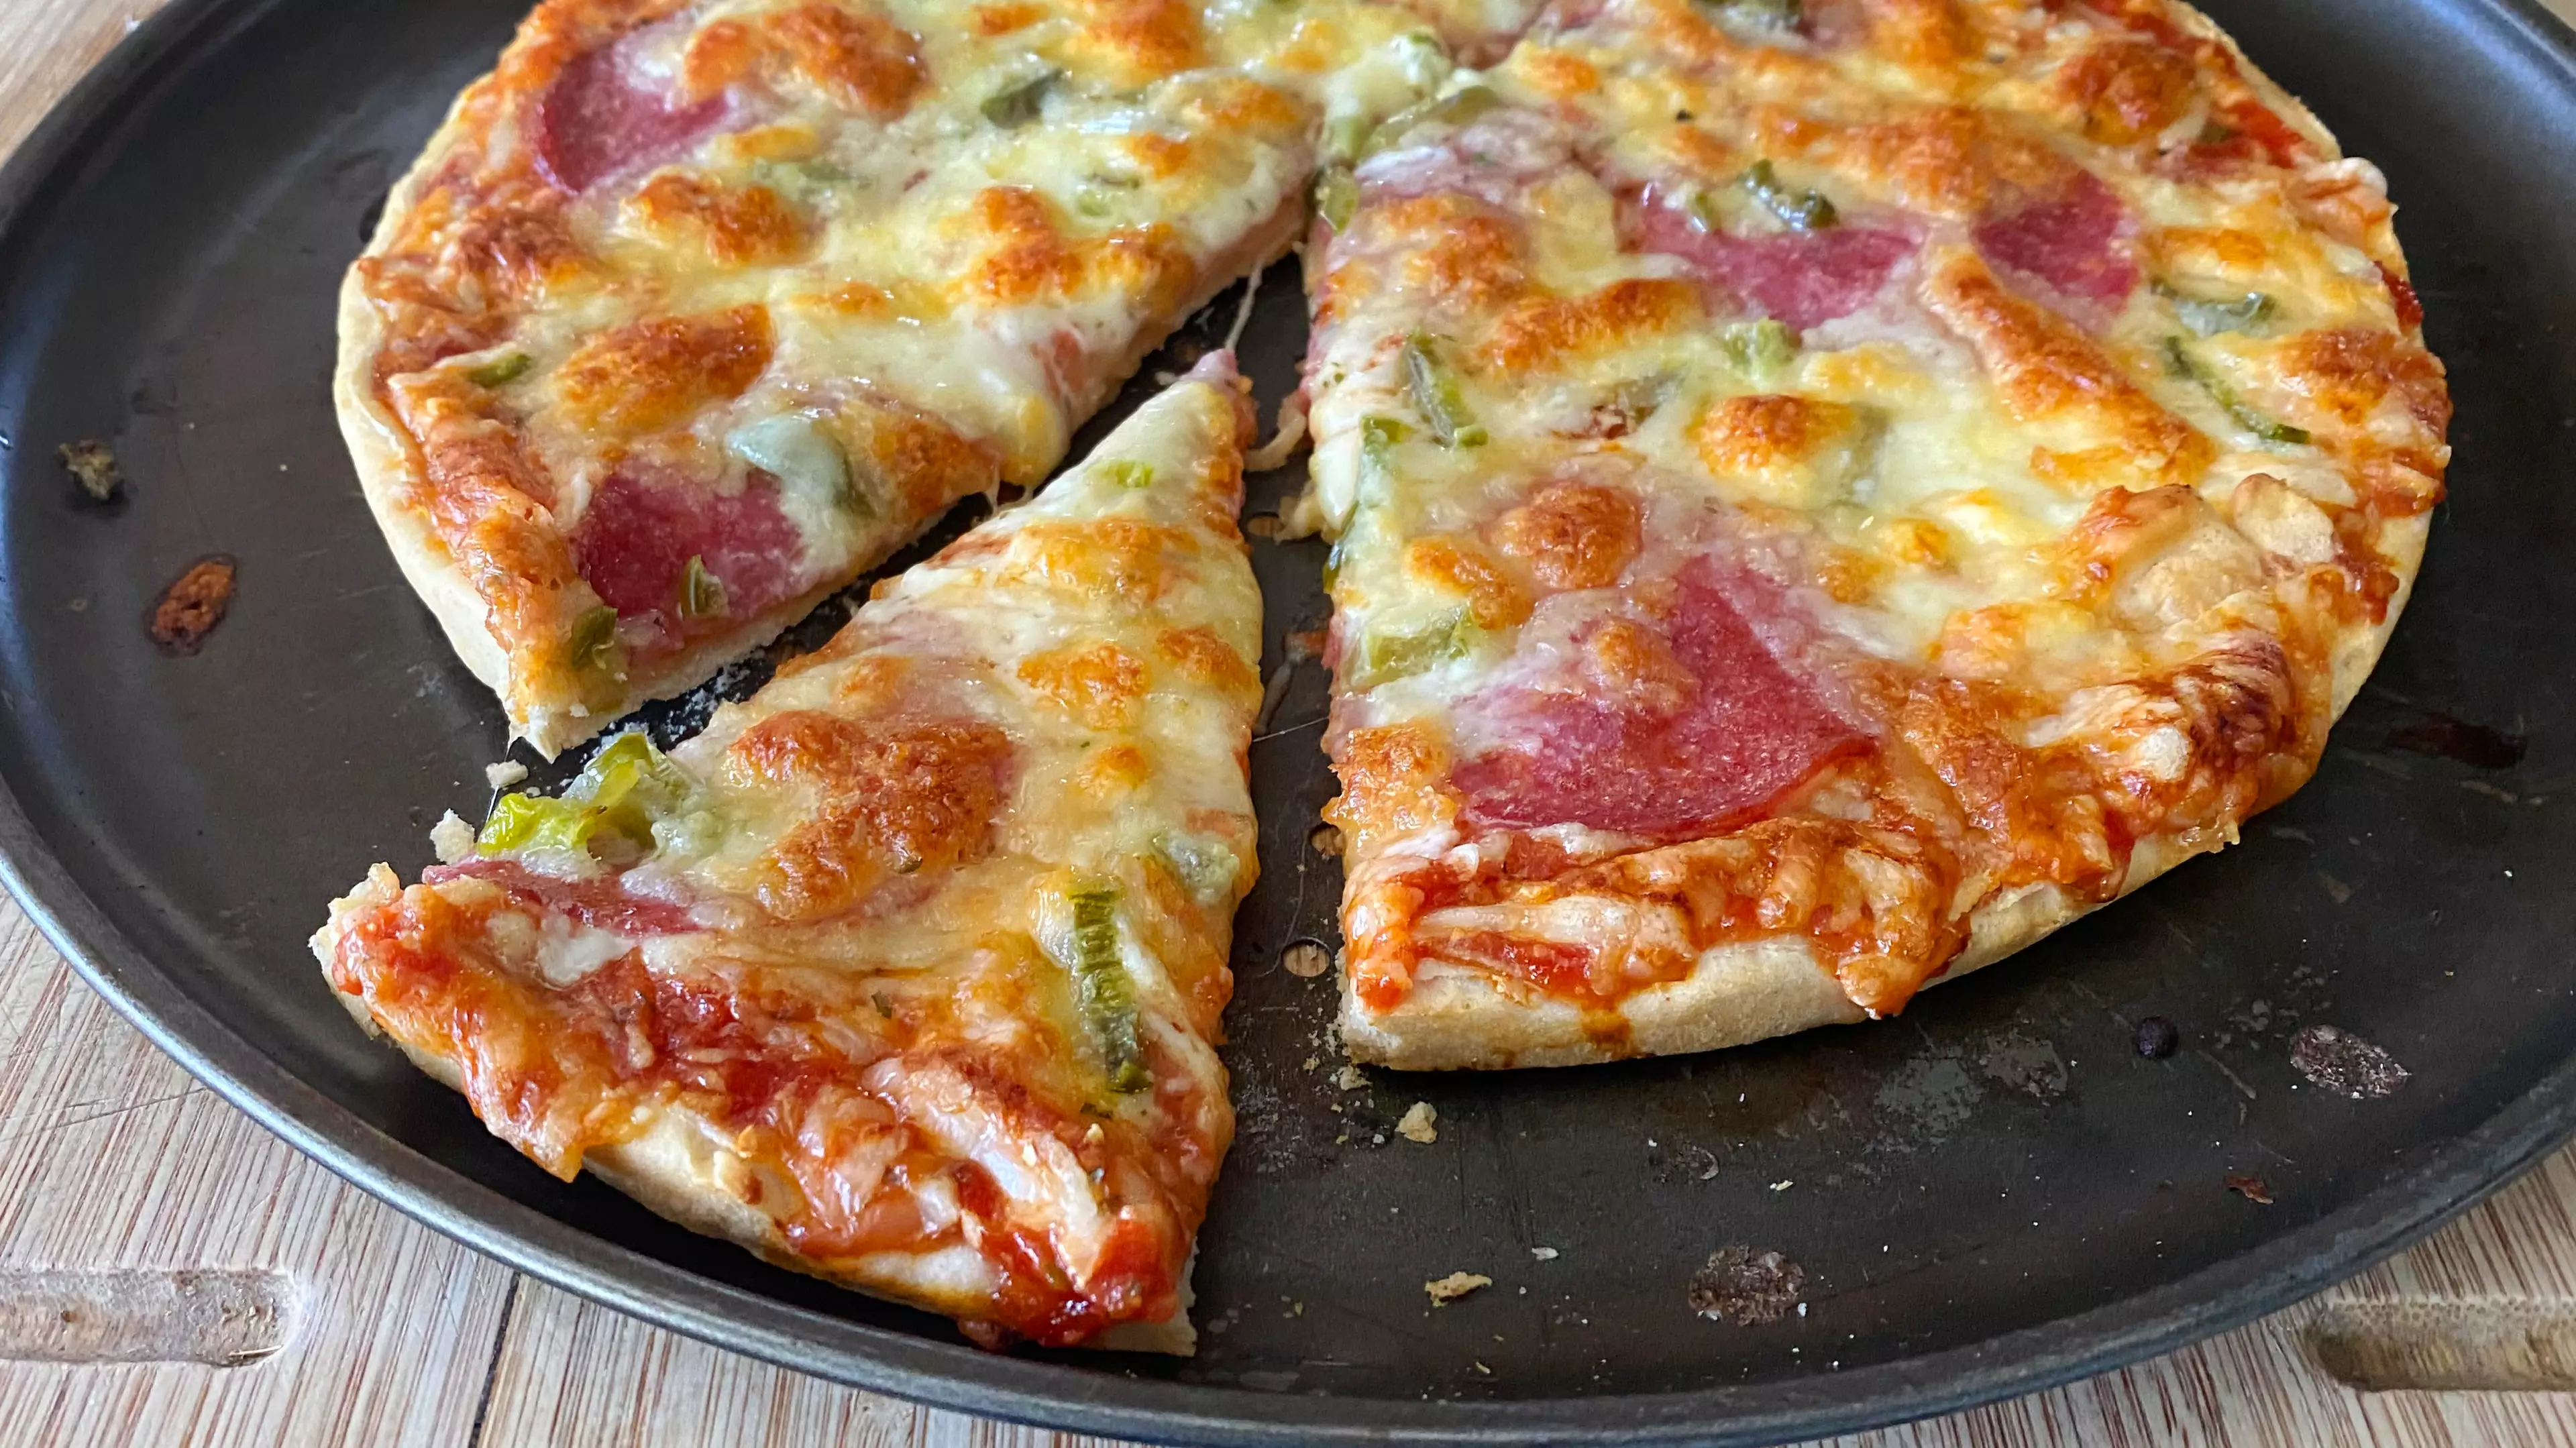 Pizza Could Be A Better Breakfast Than Sugary Cereal, According To Nutritionist